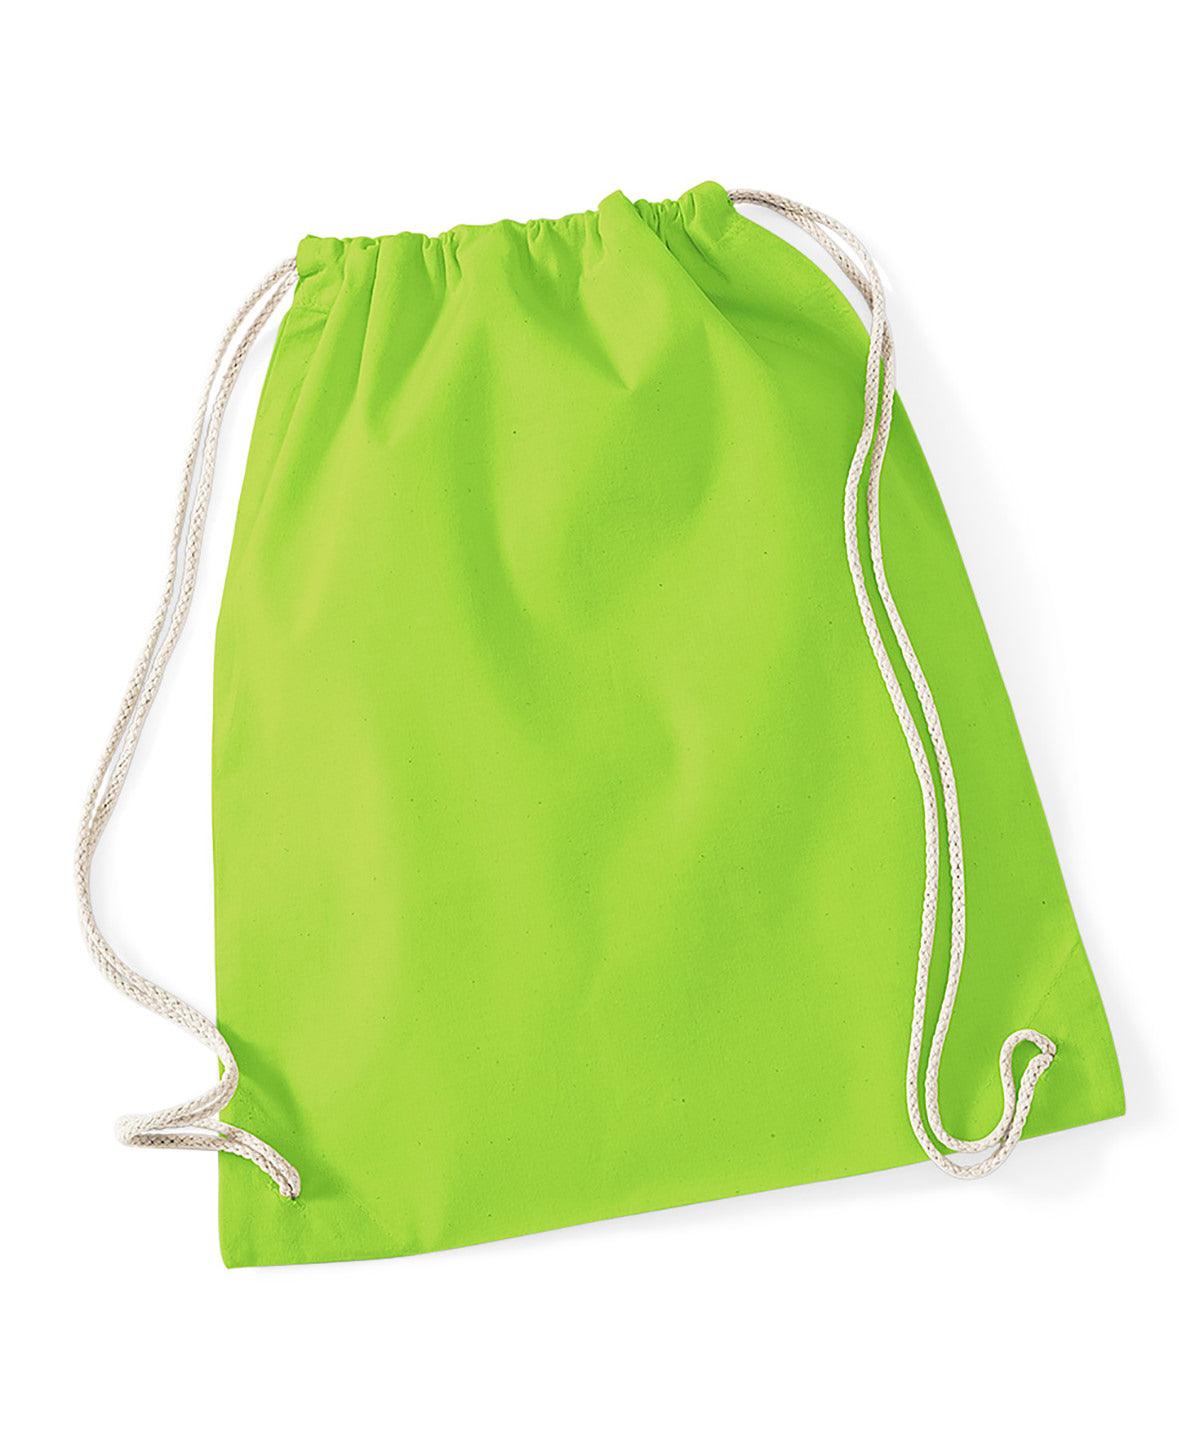 Lime Green - Cotton gymsac Bags Westford Mill Bags & Luggage, Junior, Must Haves, Pastels and Tie Dye Schoolwear Centres